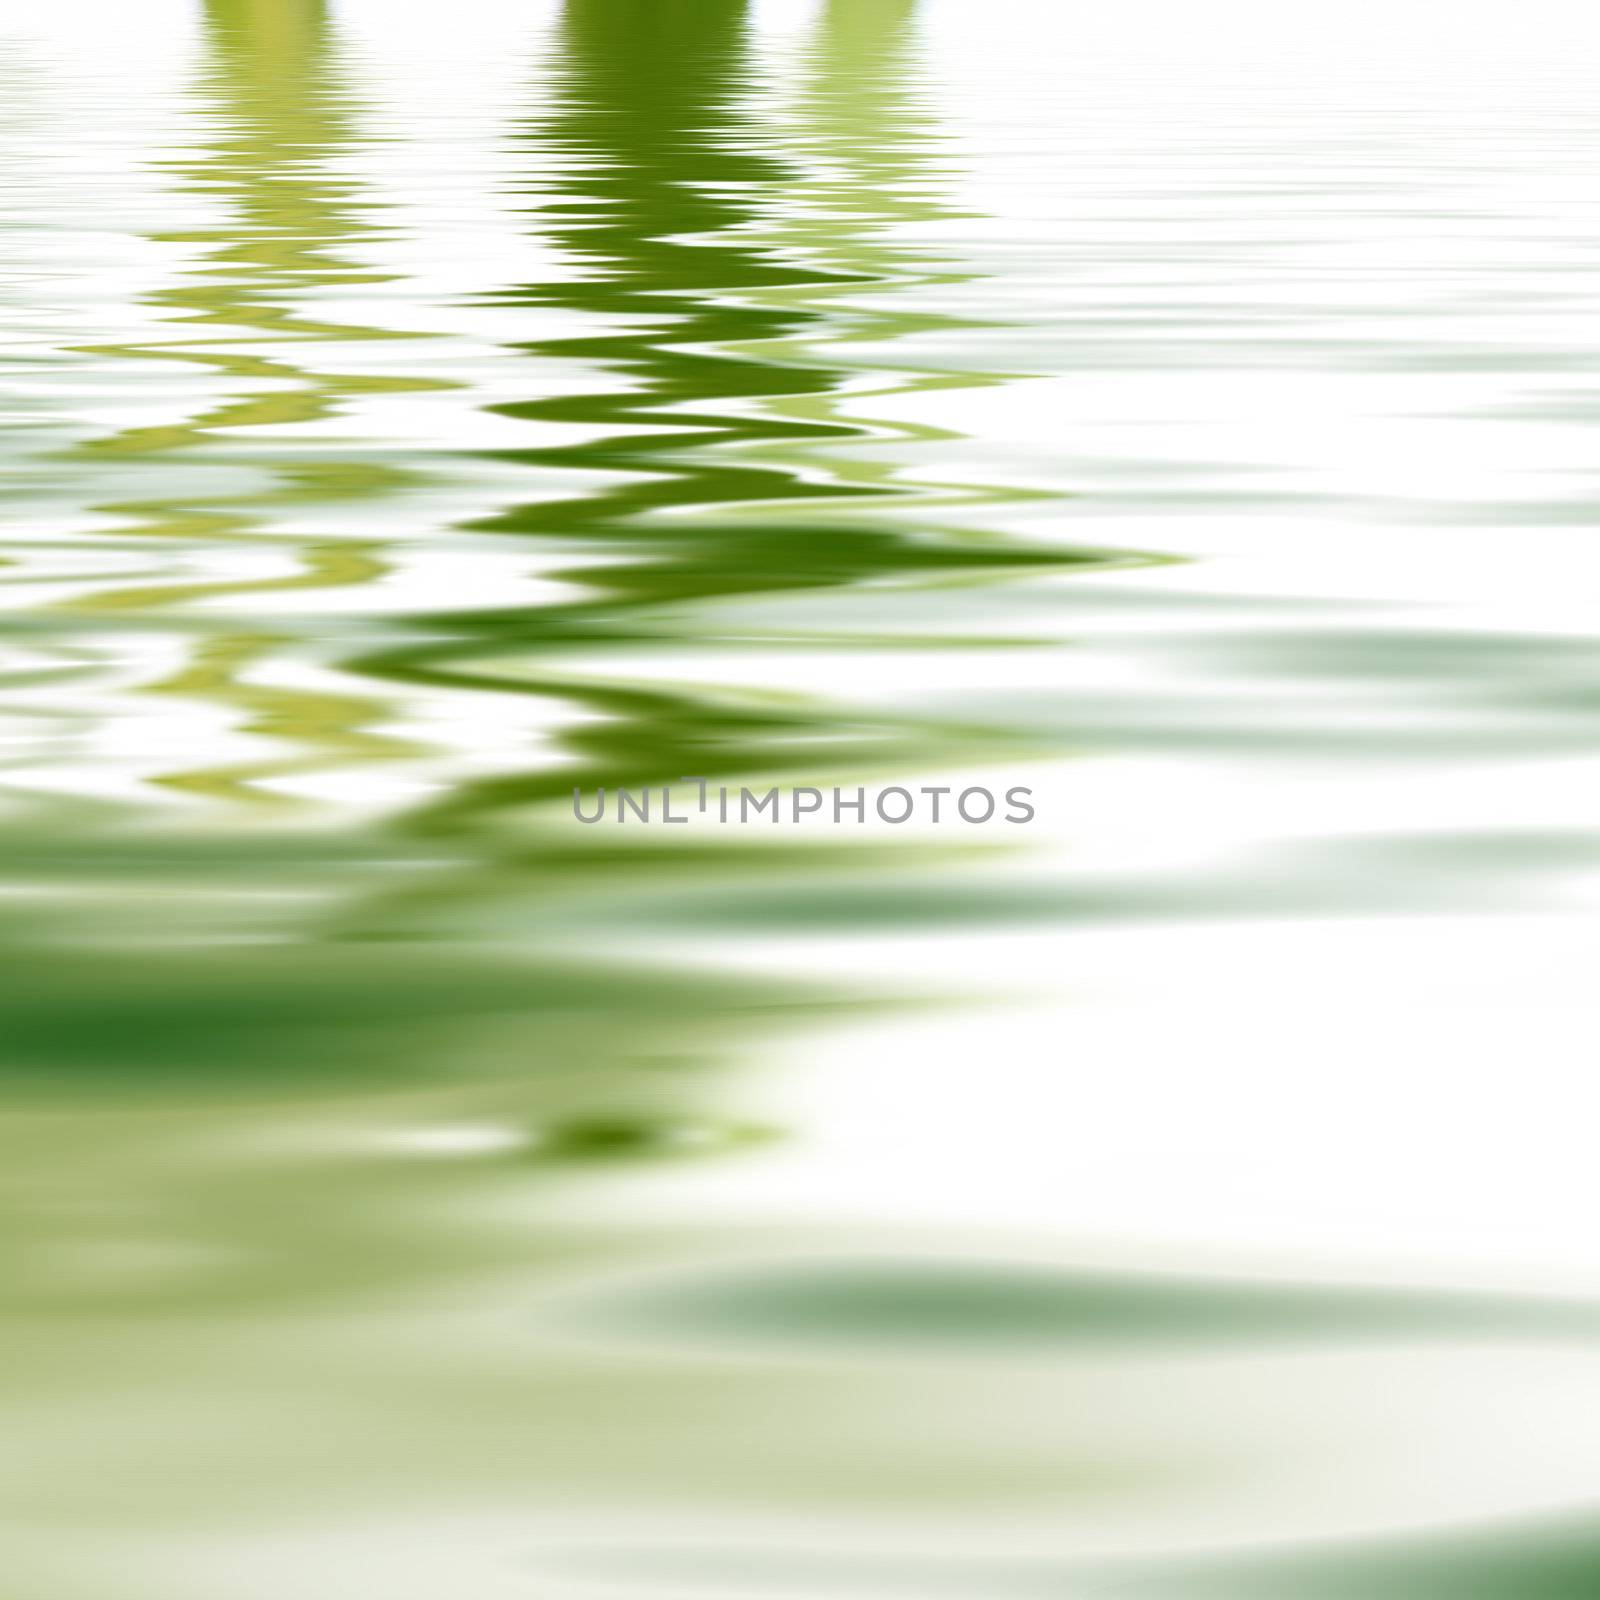 Reflection of greenery in water by Farina6000